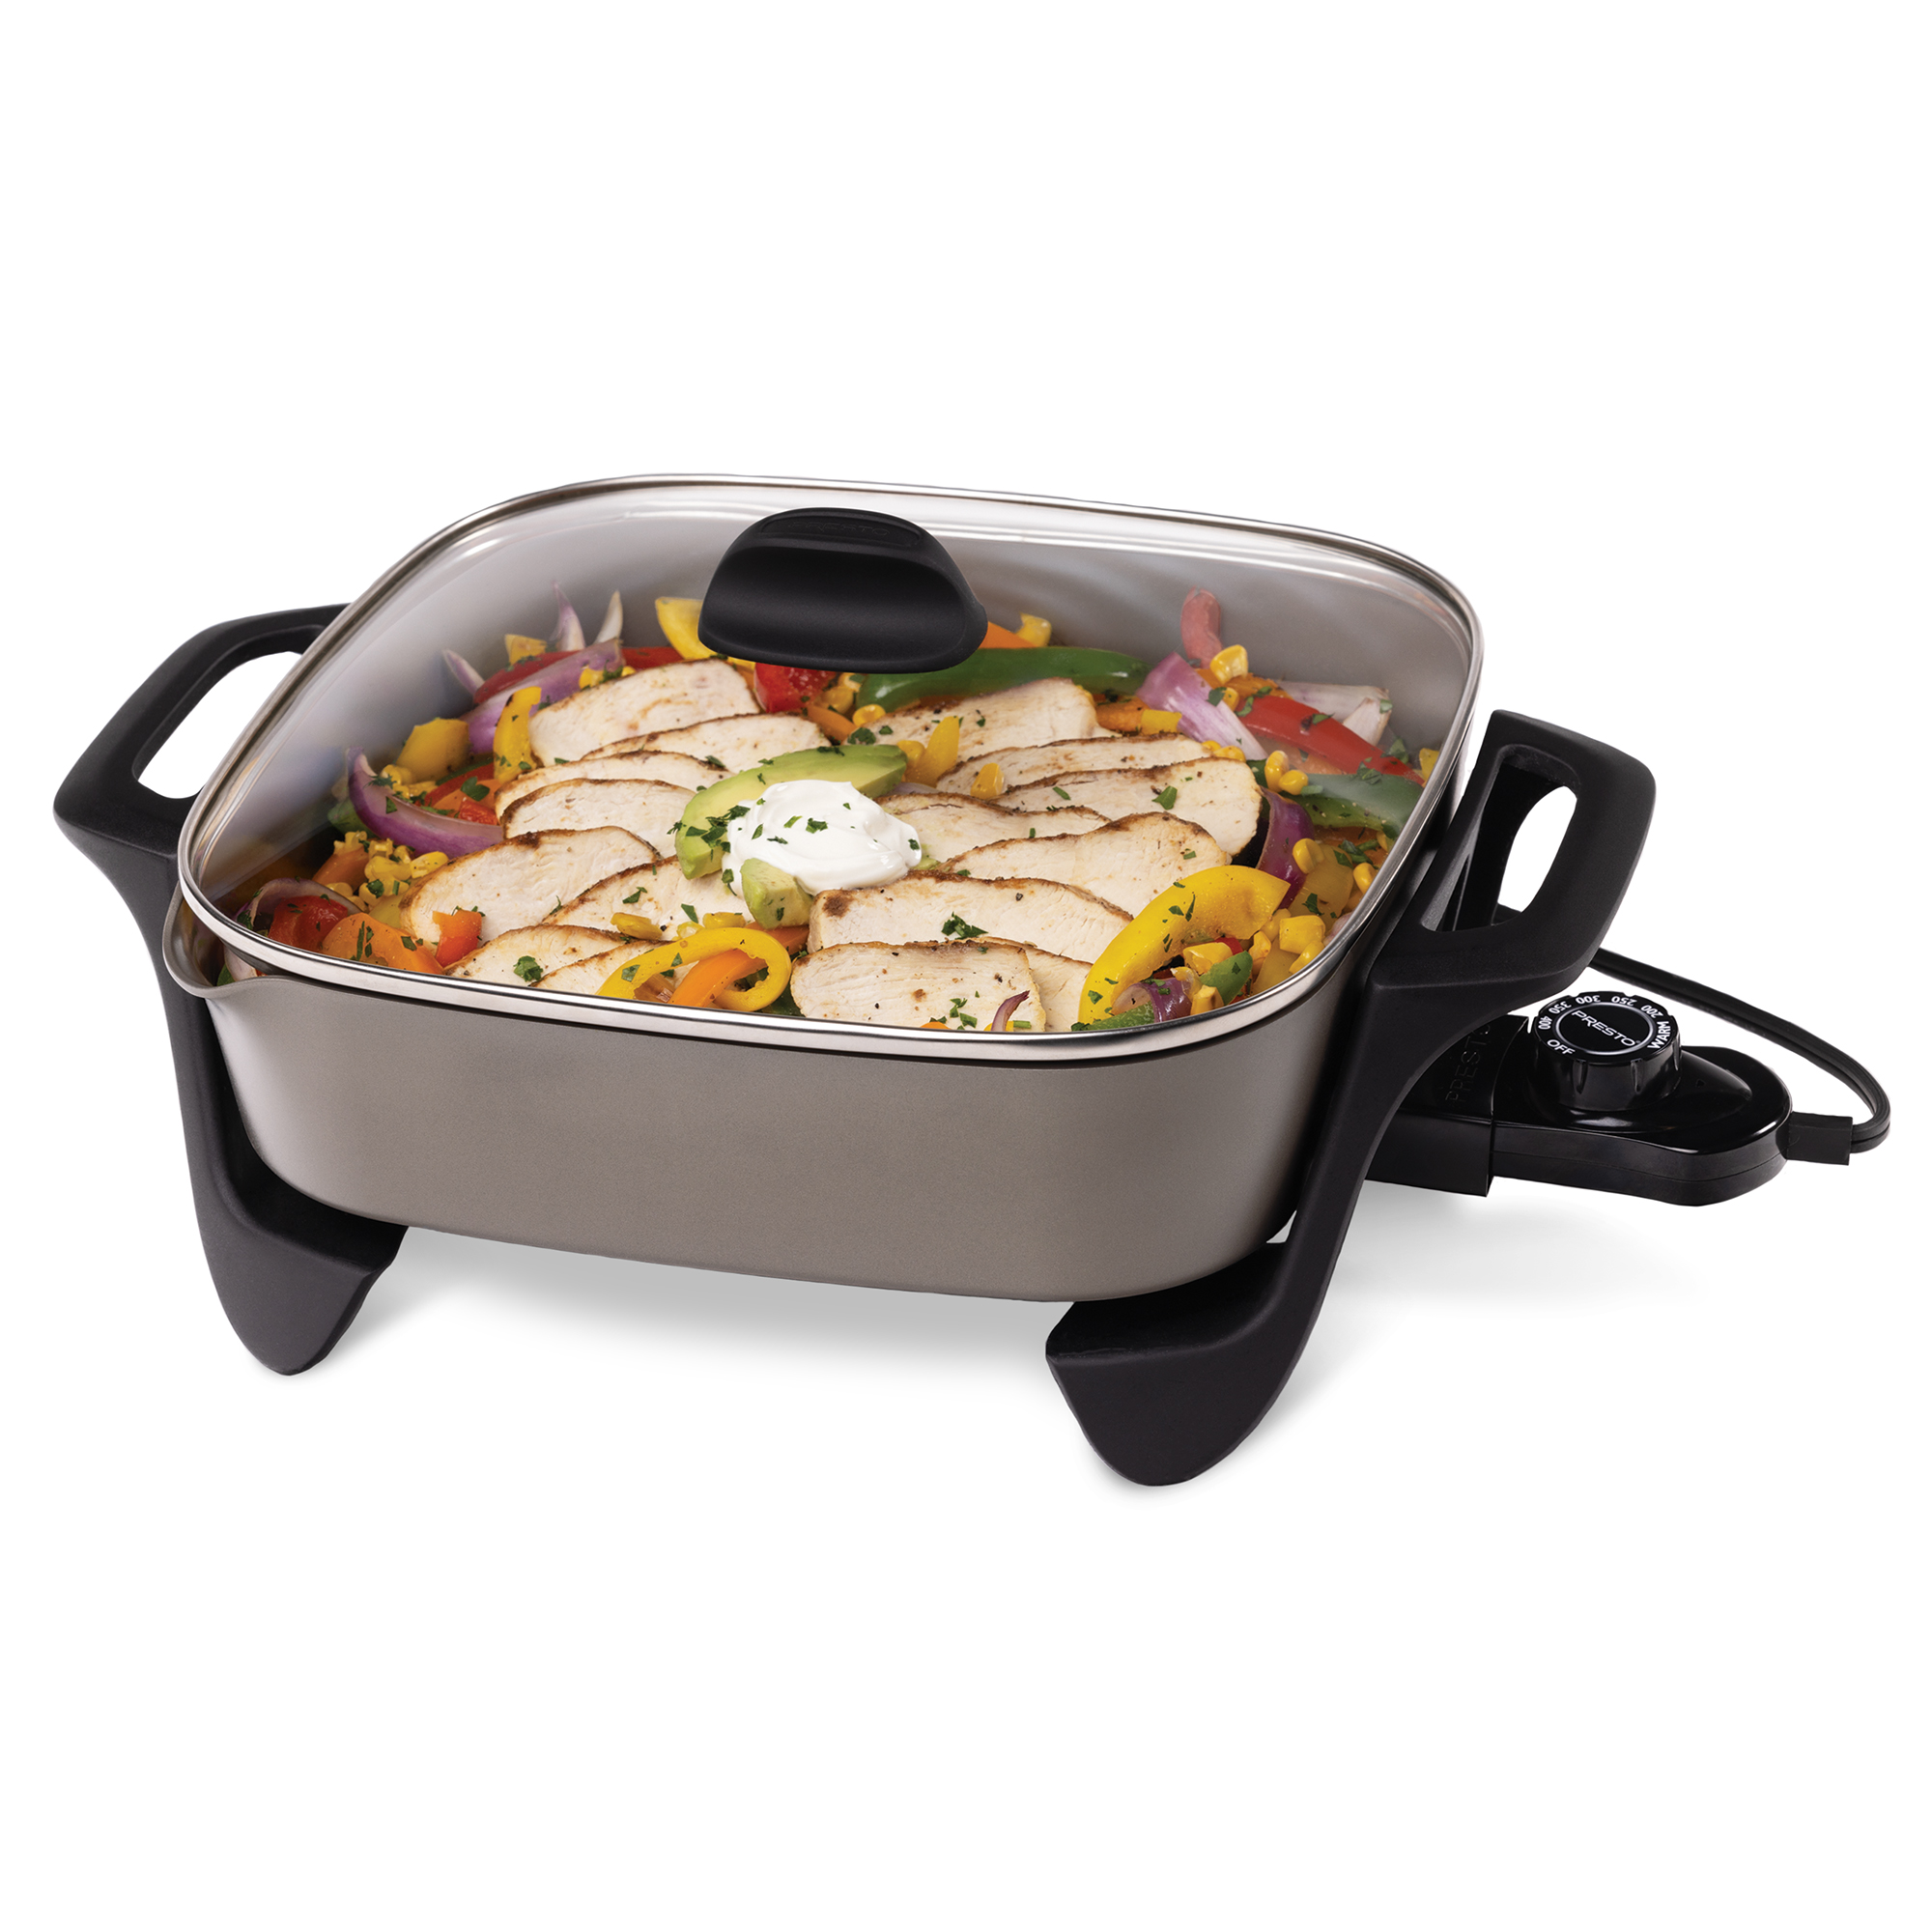 Presto 12-inch Ceramic Electric Skillet with Glass Cover,  07120 - image 1 of 12